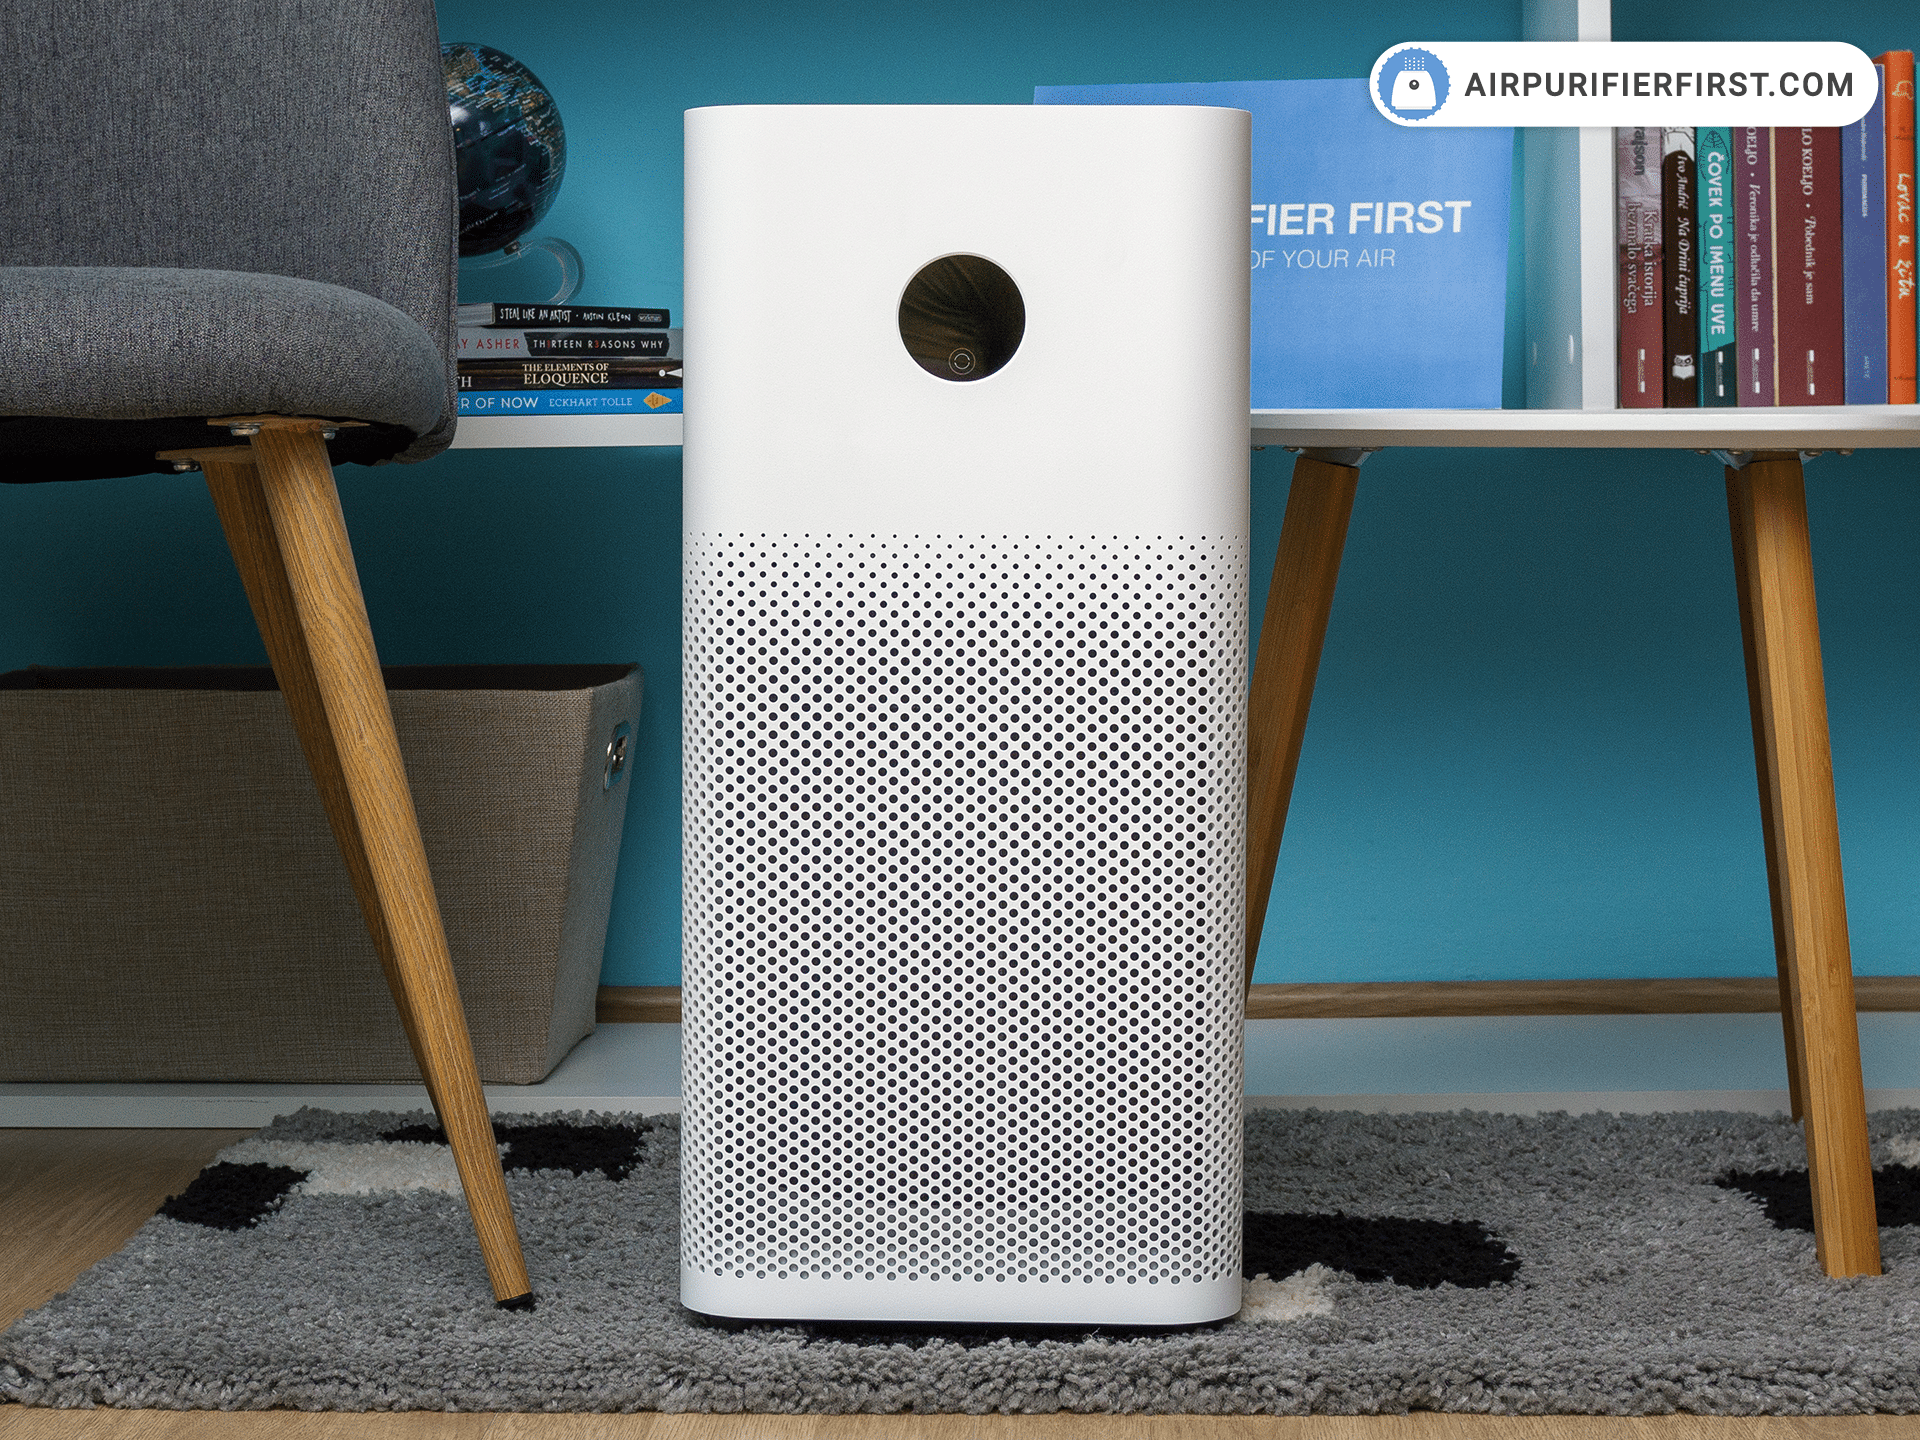  The image shows two Xiaomi Air Purifier 3 and 2S air purifiers in a living room.